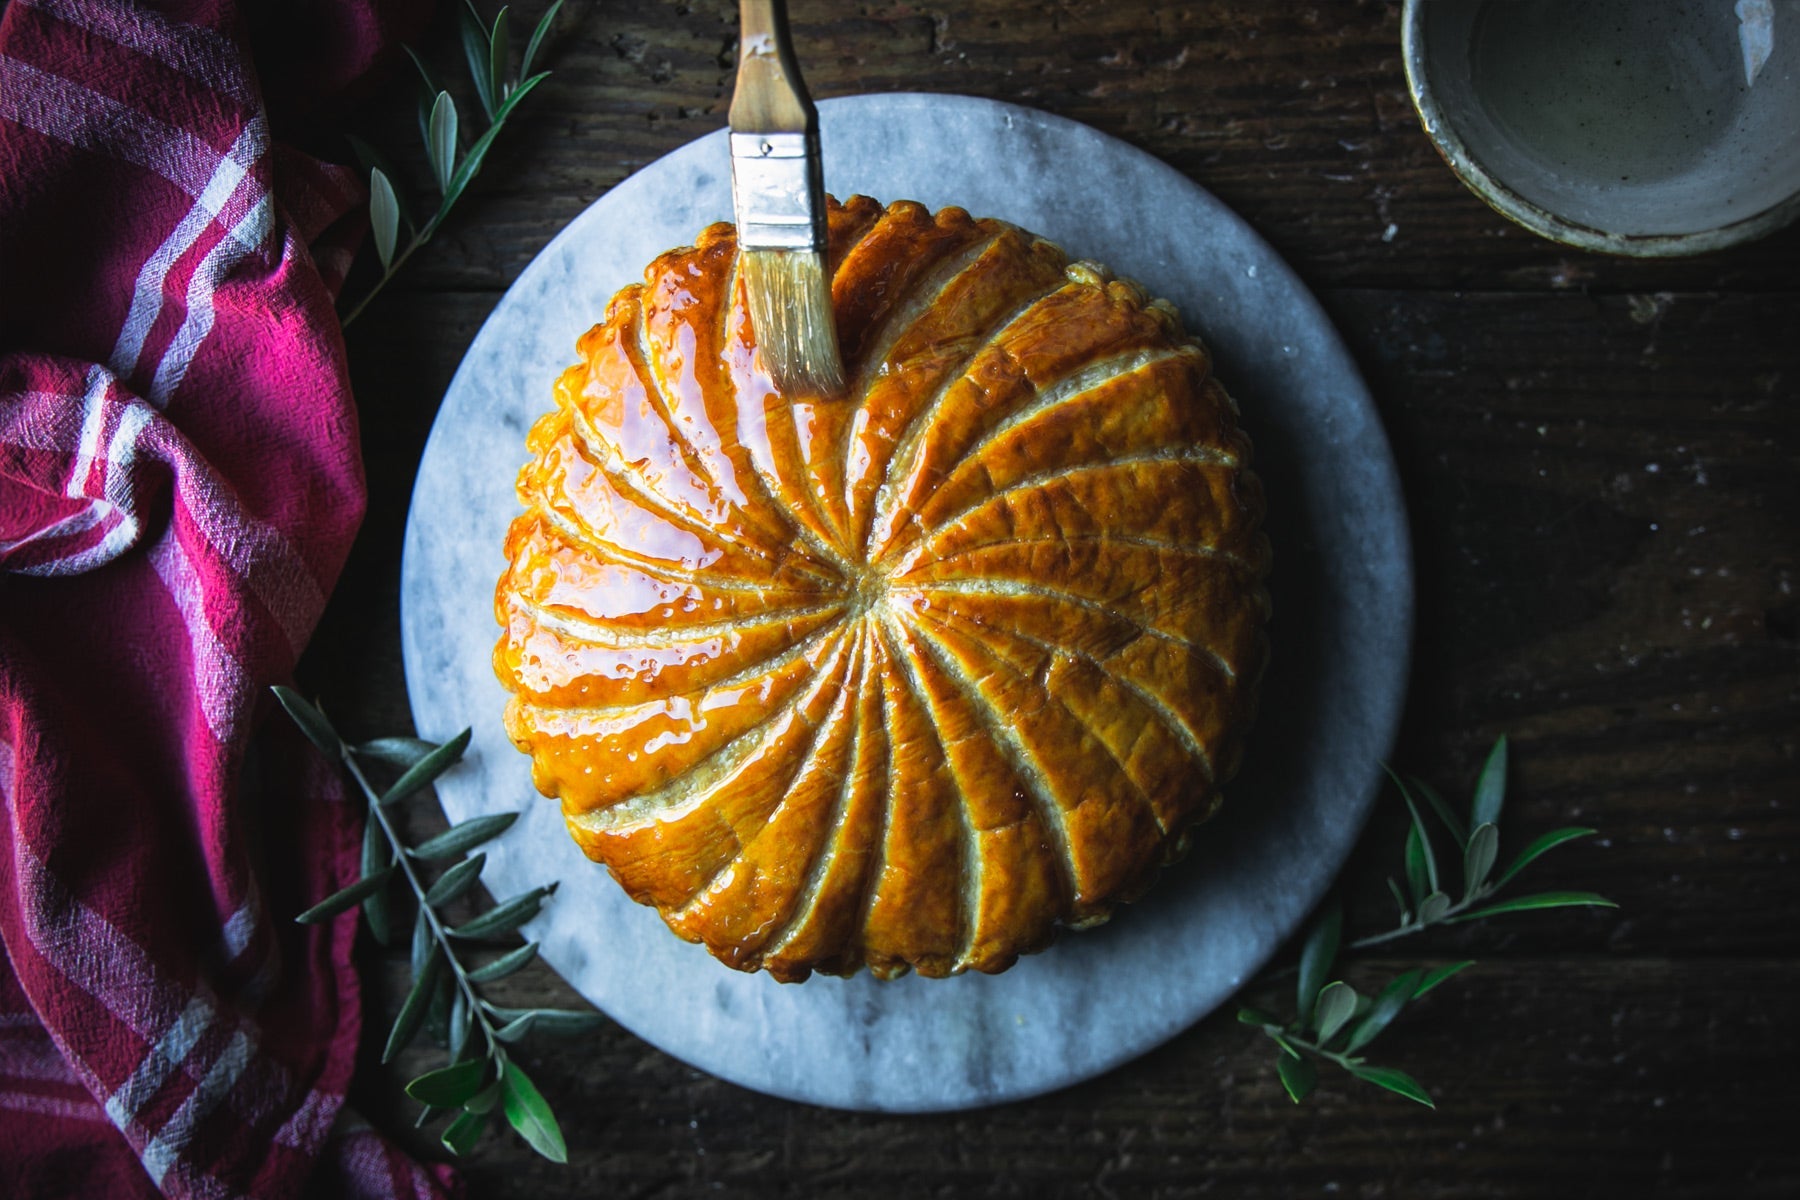 French Galette des Rois with Tonka Bean - Del's cooking twist